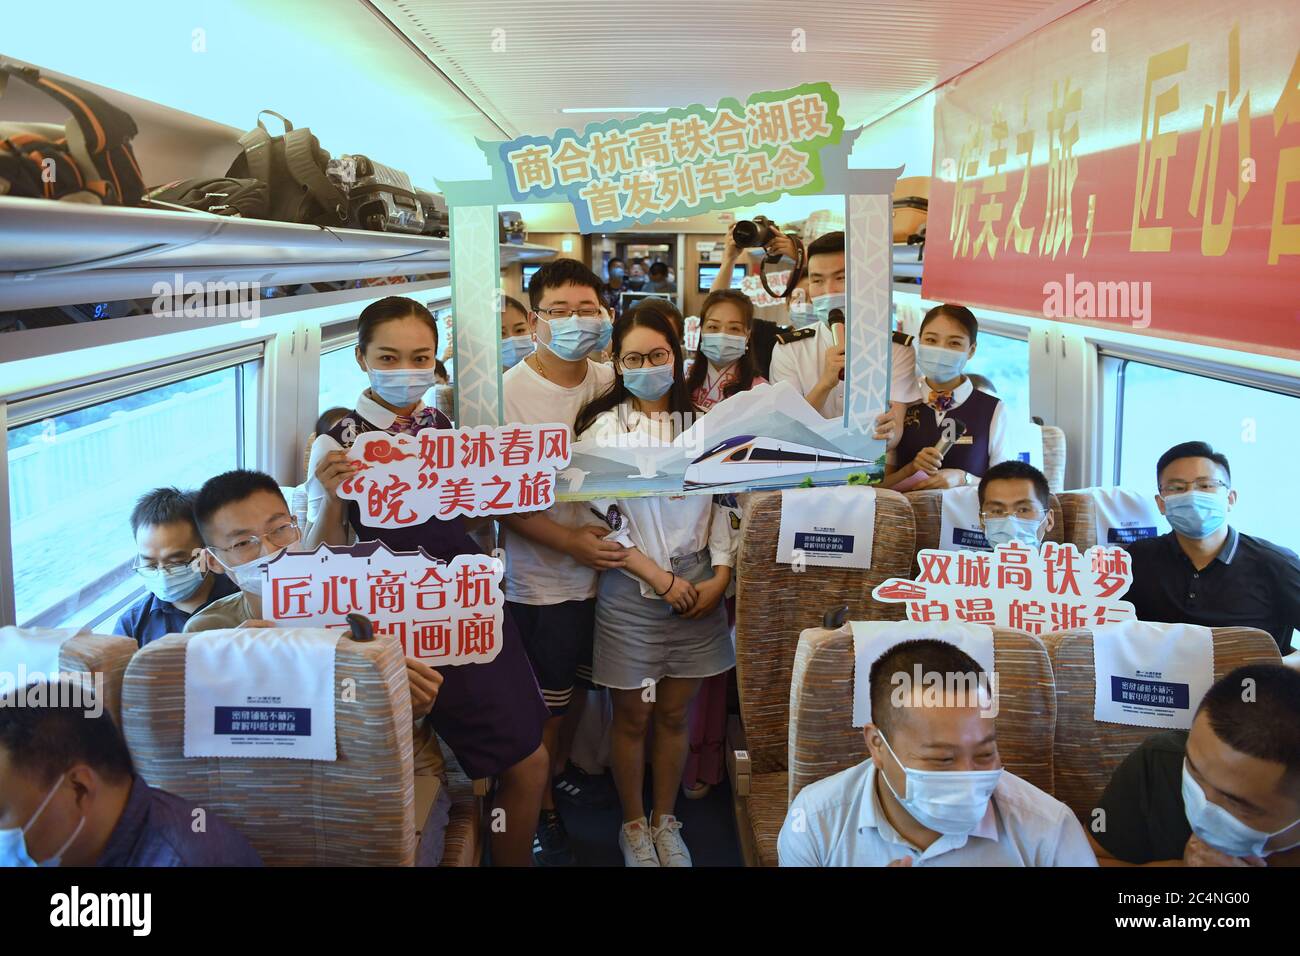 Hefei. 28th June, 2020. Train attendants pose for photos with passengers aboard train No. G9394 travelling from Hefei to Hangzhou on the Shangqiu-Hefei-Hangzhou high-speed railway, June 28, 2020. A new high-speed railway route connecting east and central China started operation on Sunday. With a designed speed of 350 kph, the route connects the city of Shangqiu in central China's Henan Province, and Hefei and Hangzhou, the capital cities of east China's Anhui and Zhejiang provinces. Credit: Liu Junxi/Xinhua/Alamy Live News Stock Photo